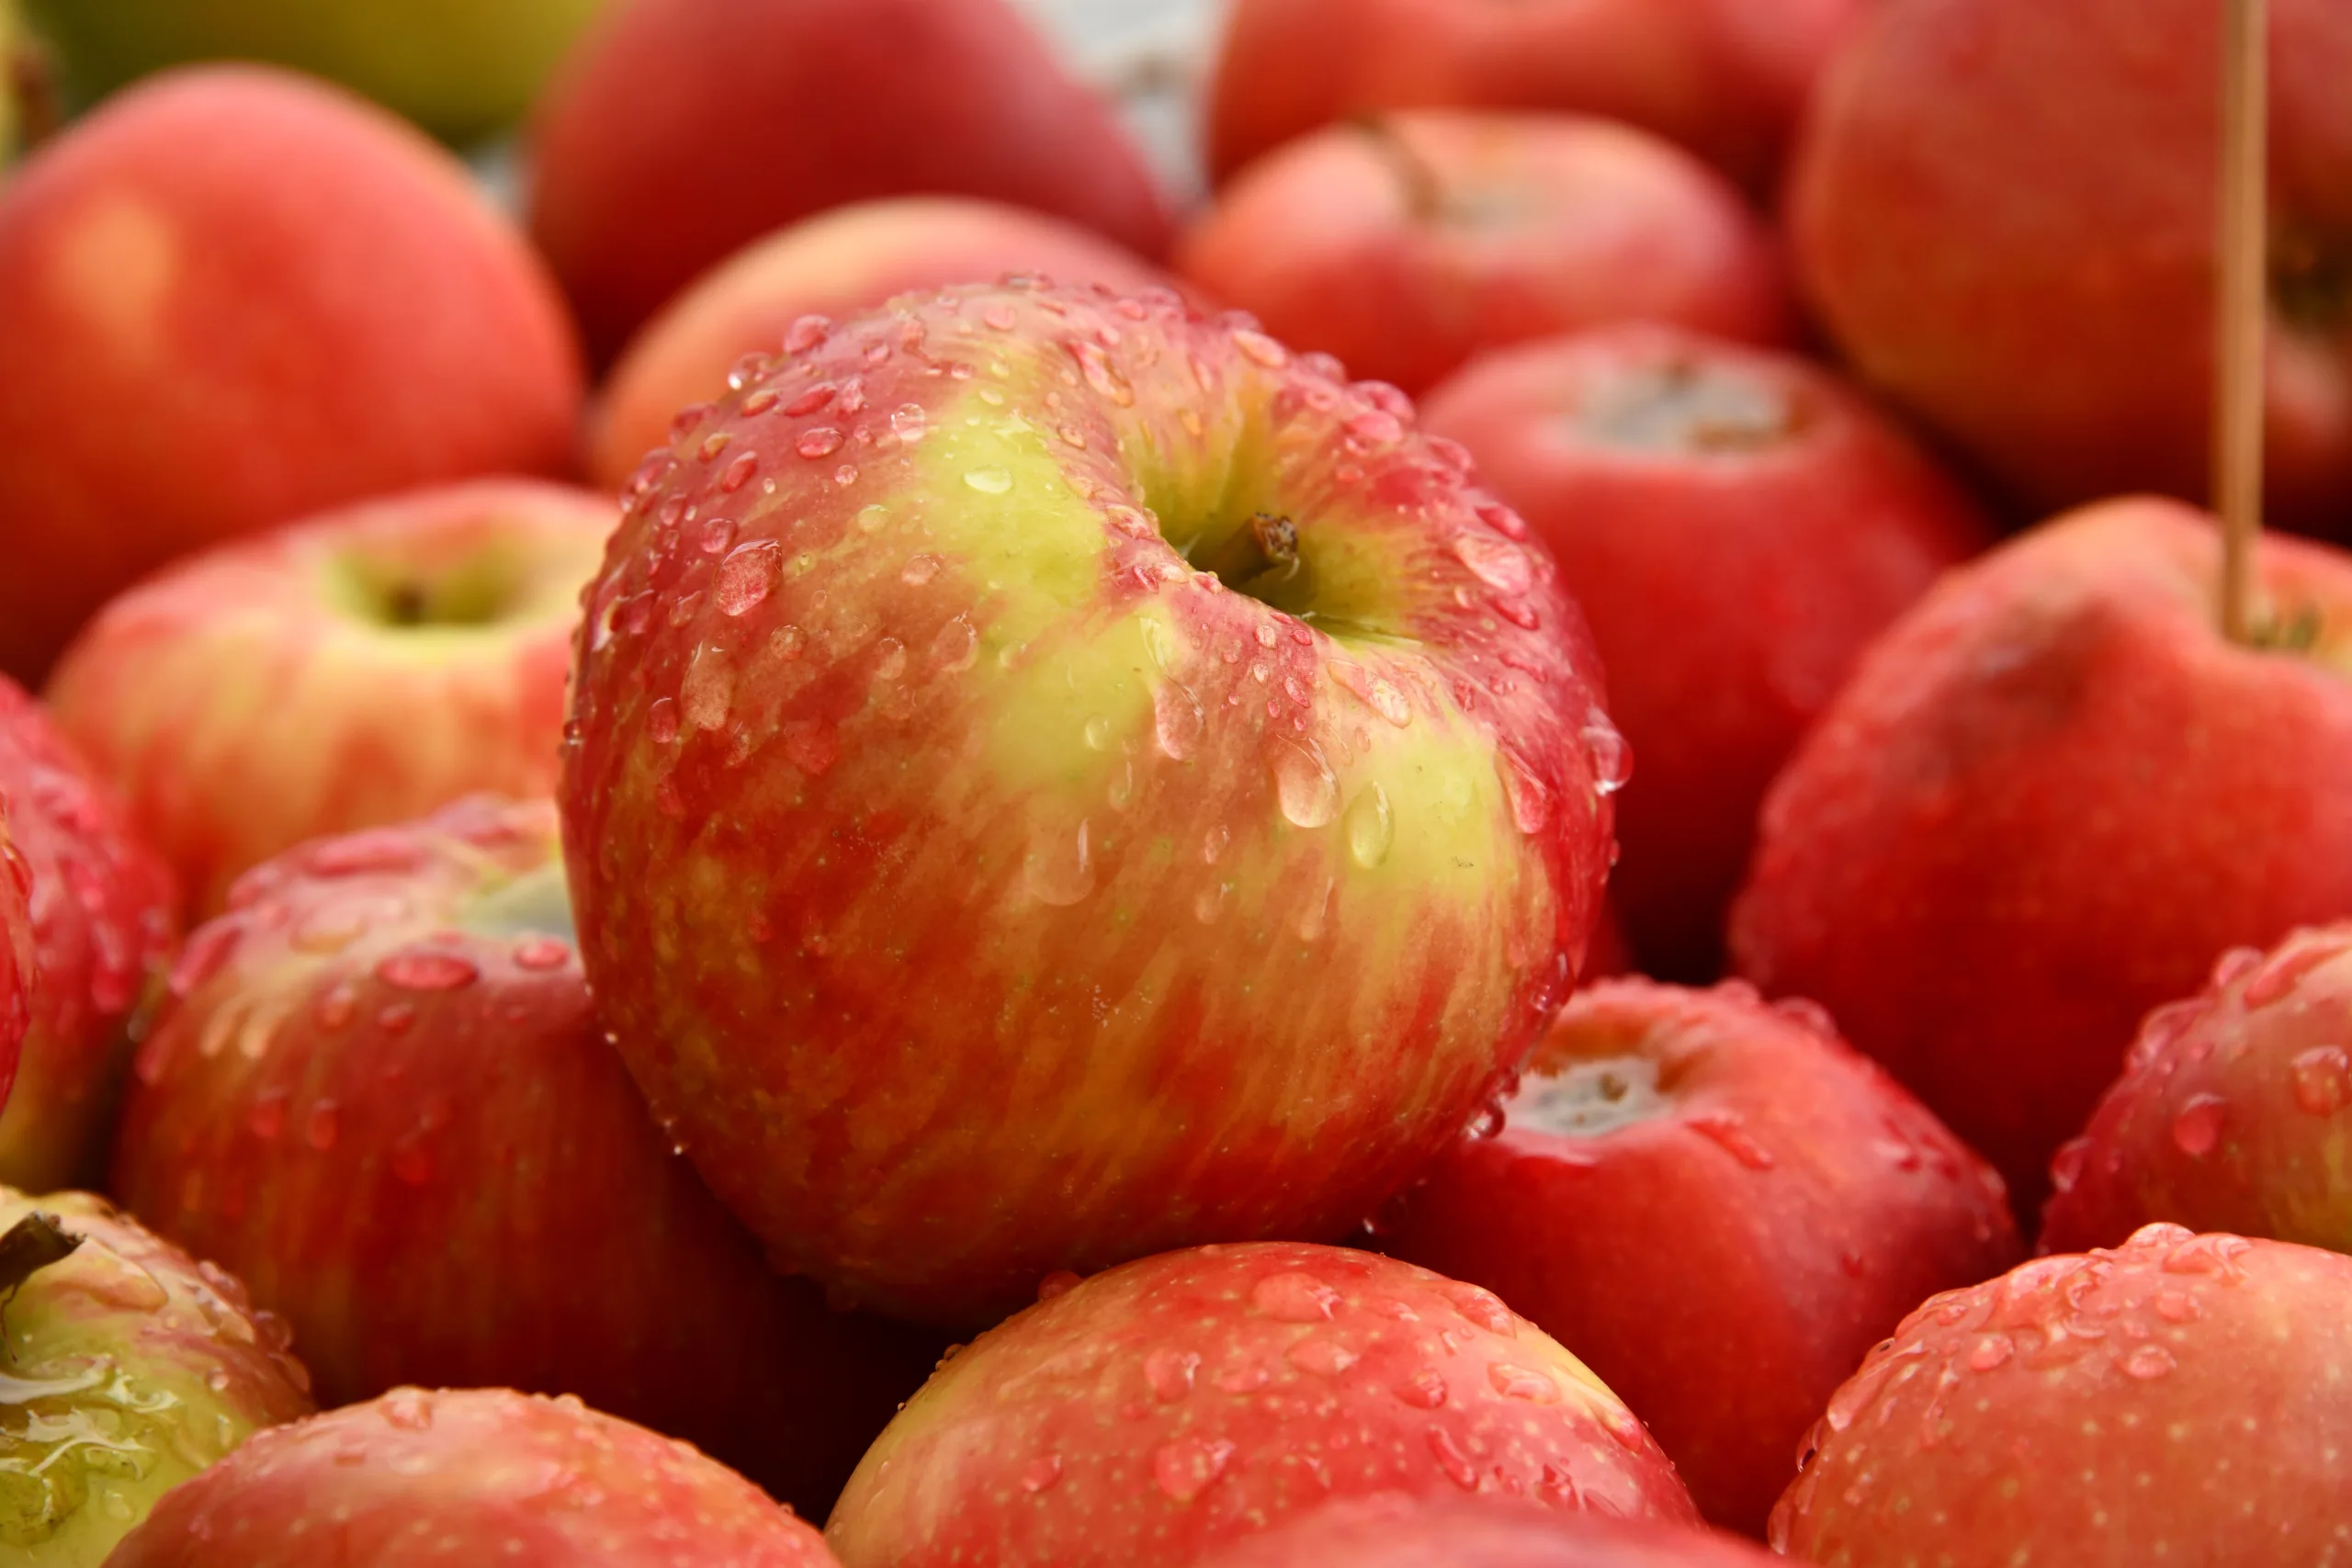 Nutrition and happiness are connected. Apples make a great snack!